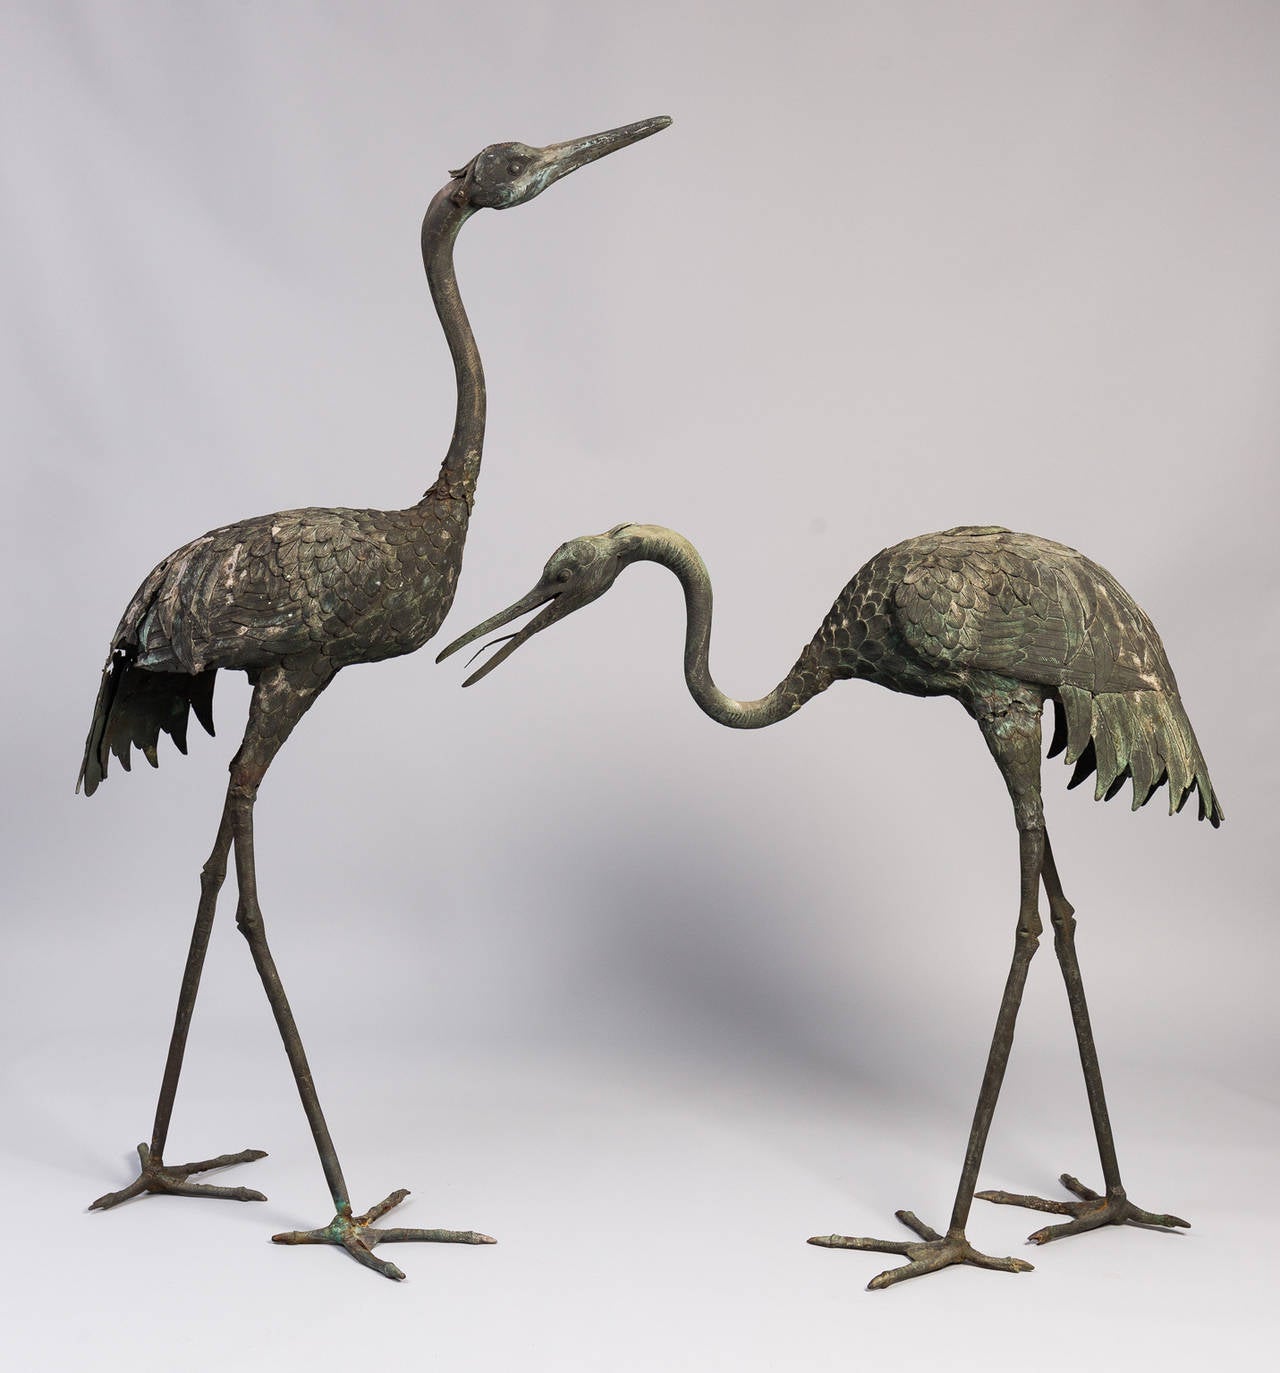 Pair of large Japanese Meiji period cast bronze red-crowned cranes (Tancho) rendered in high relief. There is some loss to the back tail feathers of the tall crane.  Cranes are symbols of peace, longevity and fortune.
Dimensions:
Tall: 65